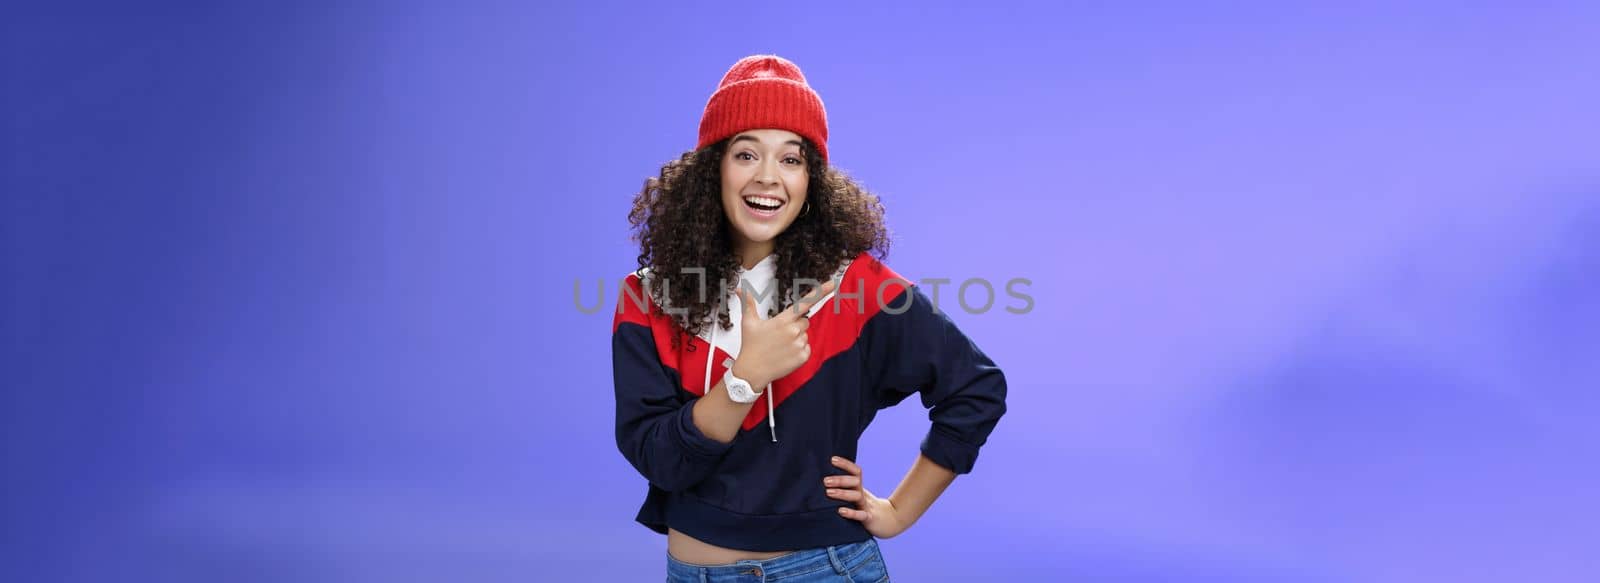 Lifestyle. Stylish and sociable friendly-looking attractive woman with curly hair in warm beanie pointing at upper left corner laughing from joy and amazement having fun posing happily over blue background.